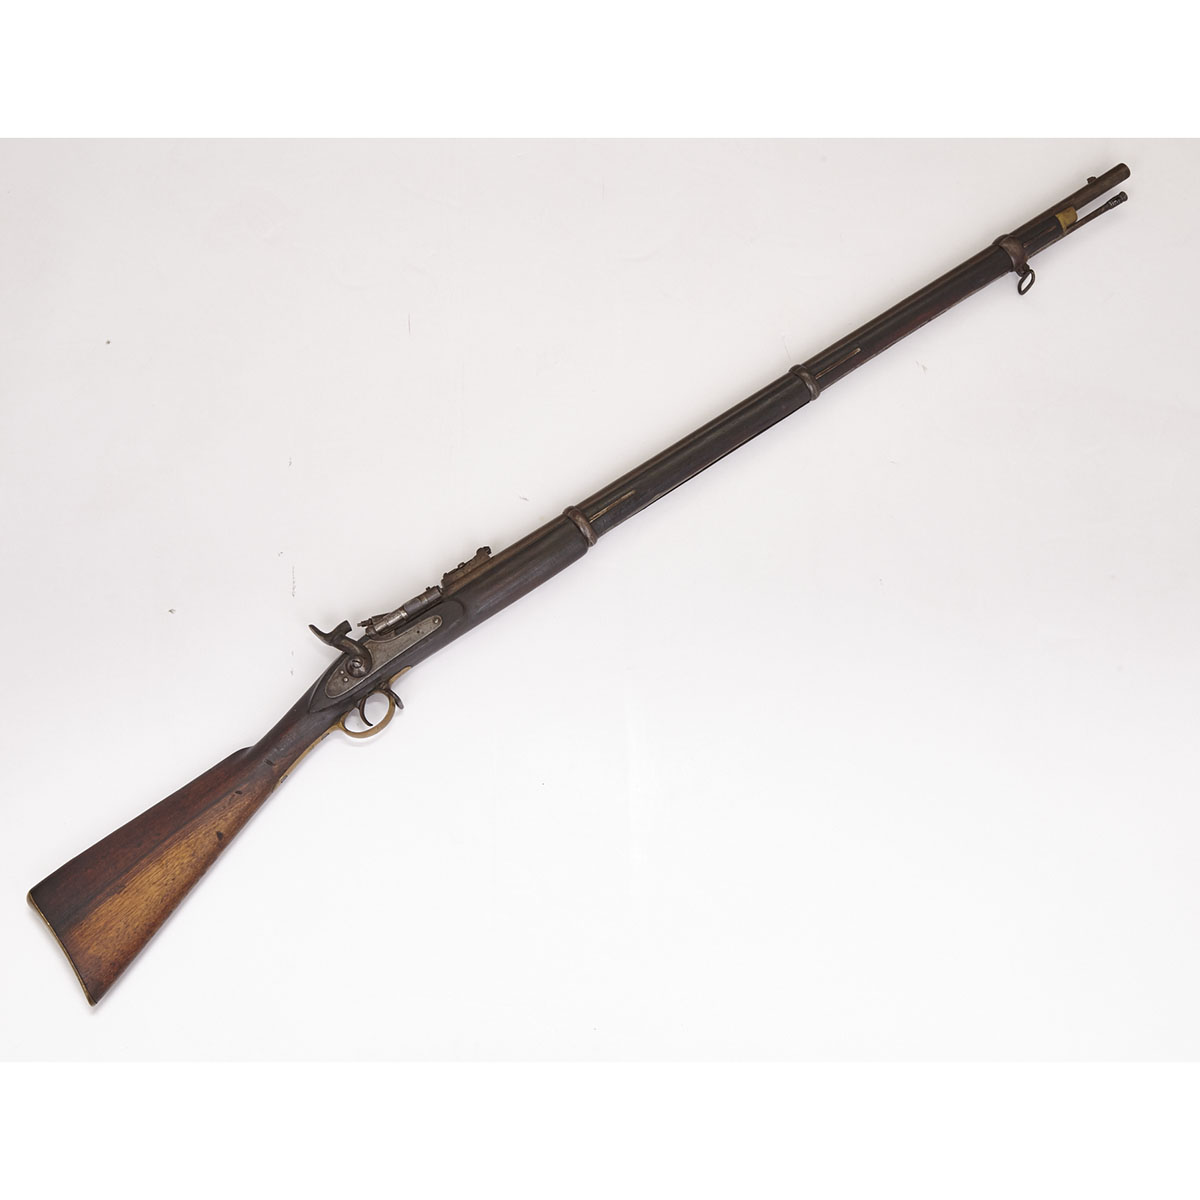 Snider Enfield Model 1853 Type Conversion Rifle, mid 19th century